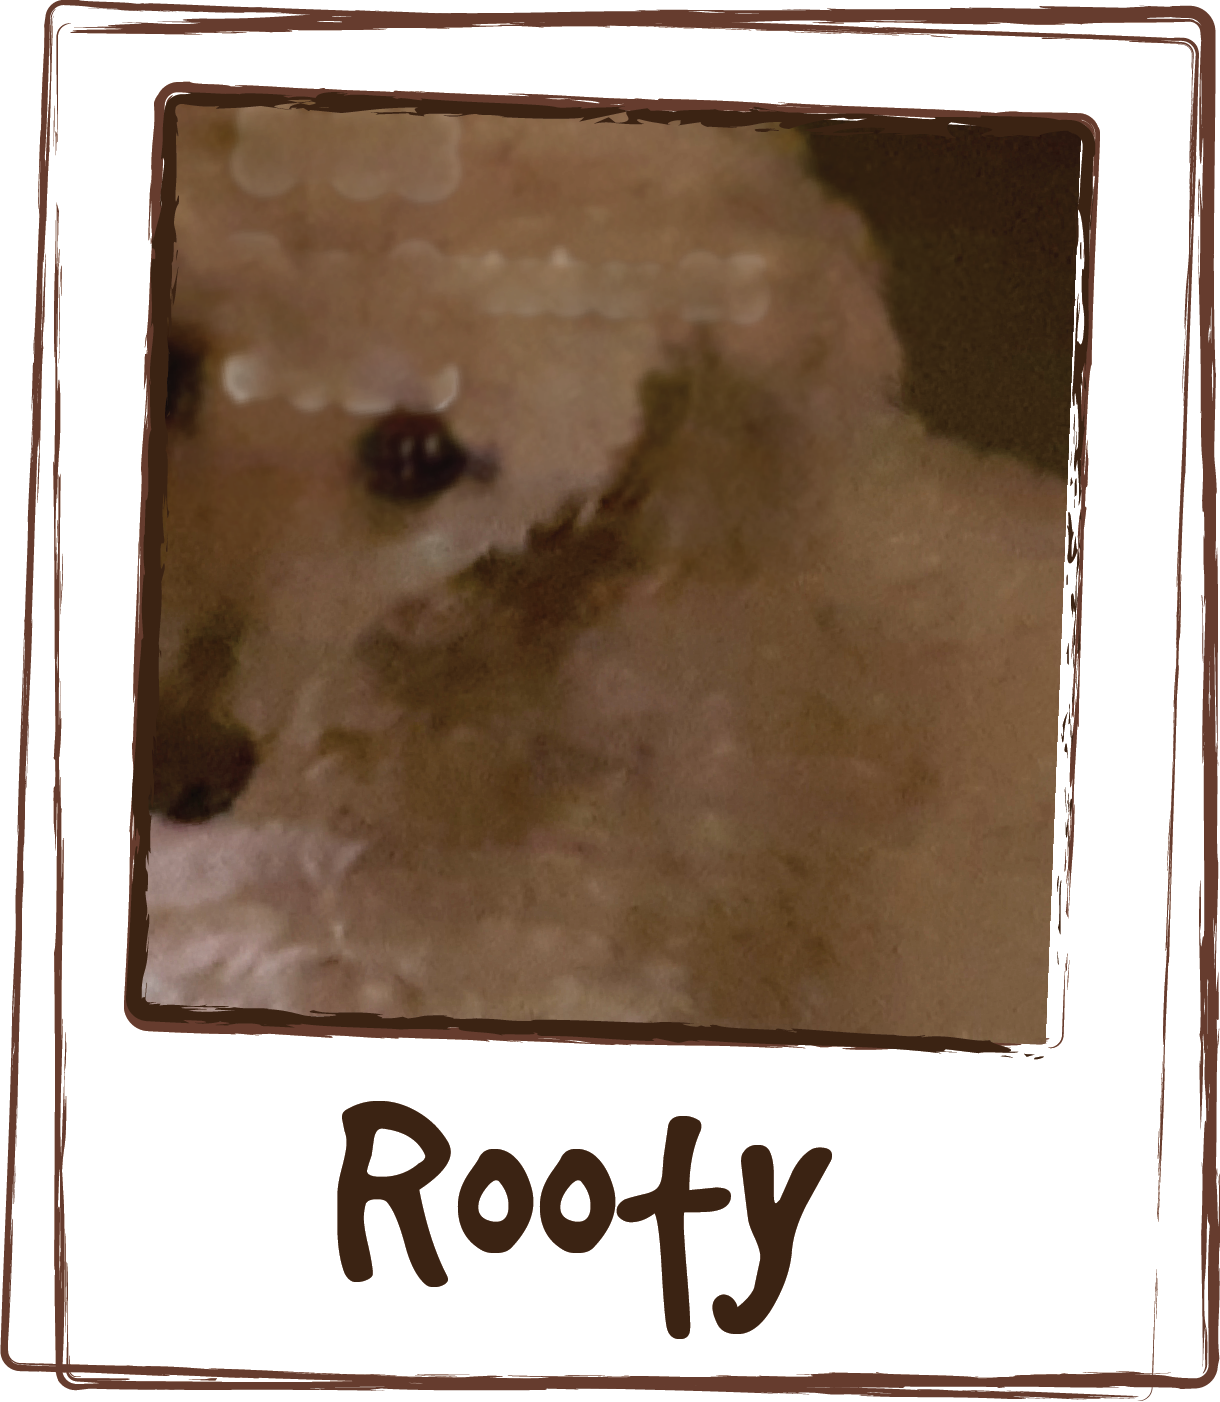  “My dog Rooty gets nervous at the Vet, getting groomed, and being away from me for an afternoon. I found Licks at a store and it works great, I even gave some packets to my friends whose dogs would cry when left alone, it worked great for them too!”